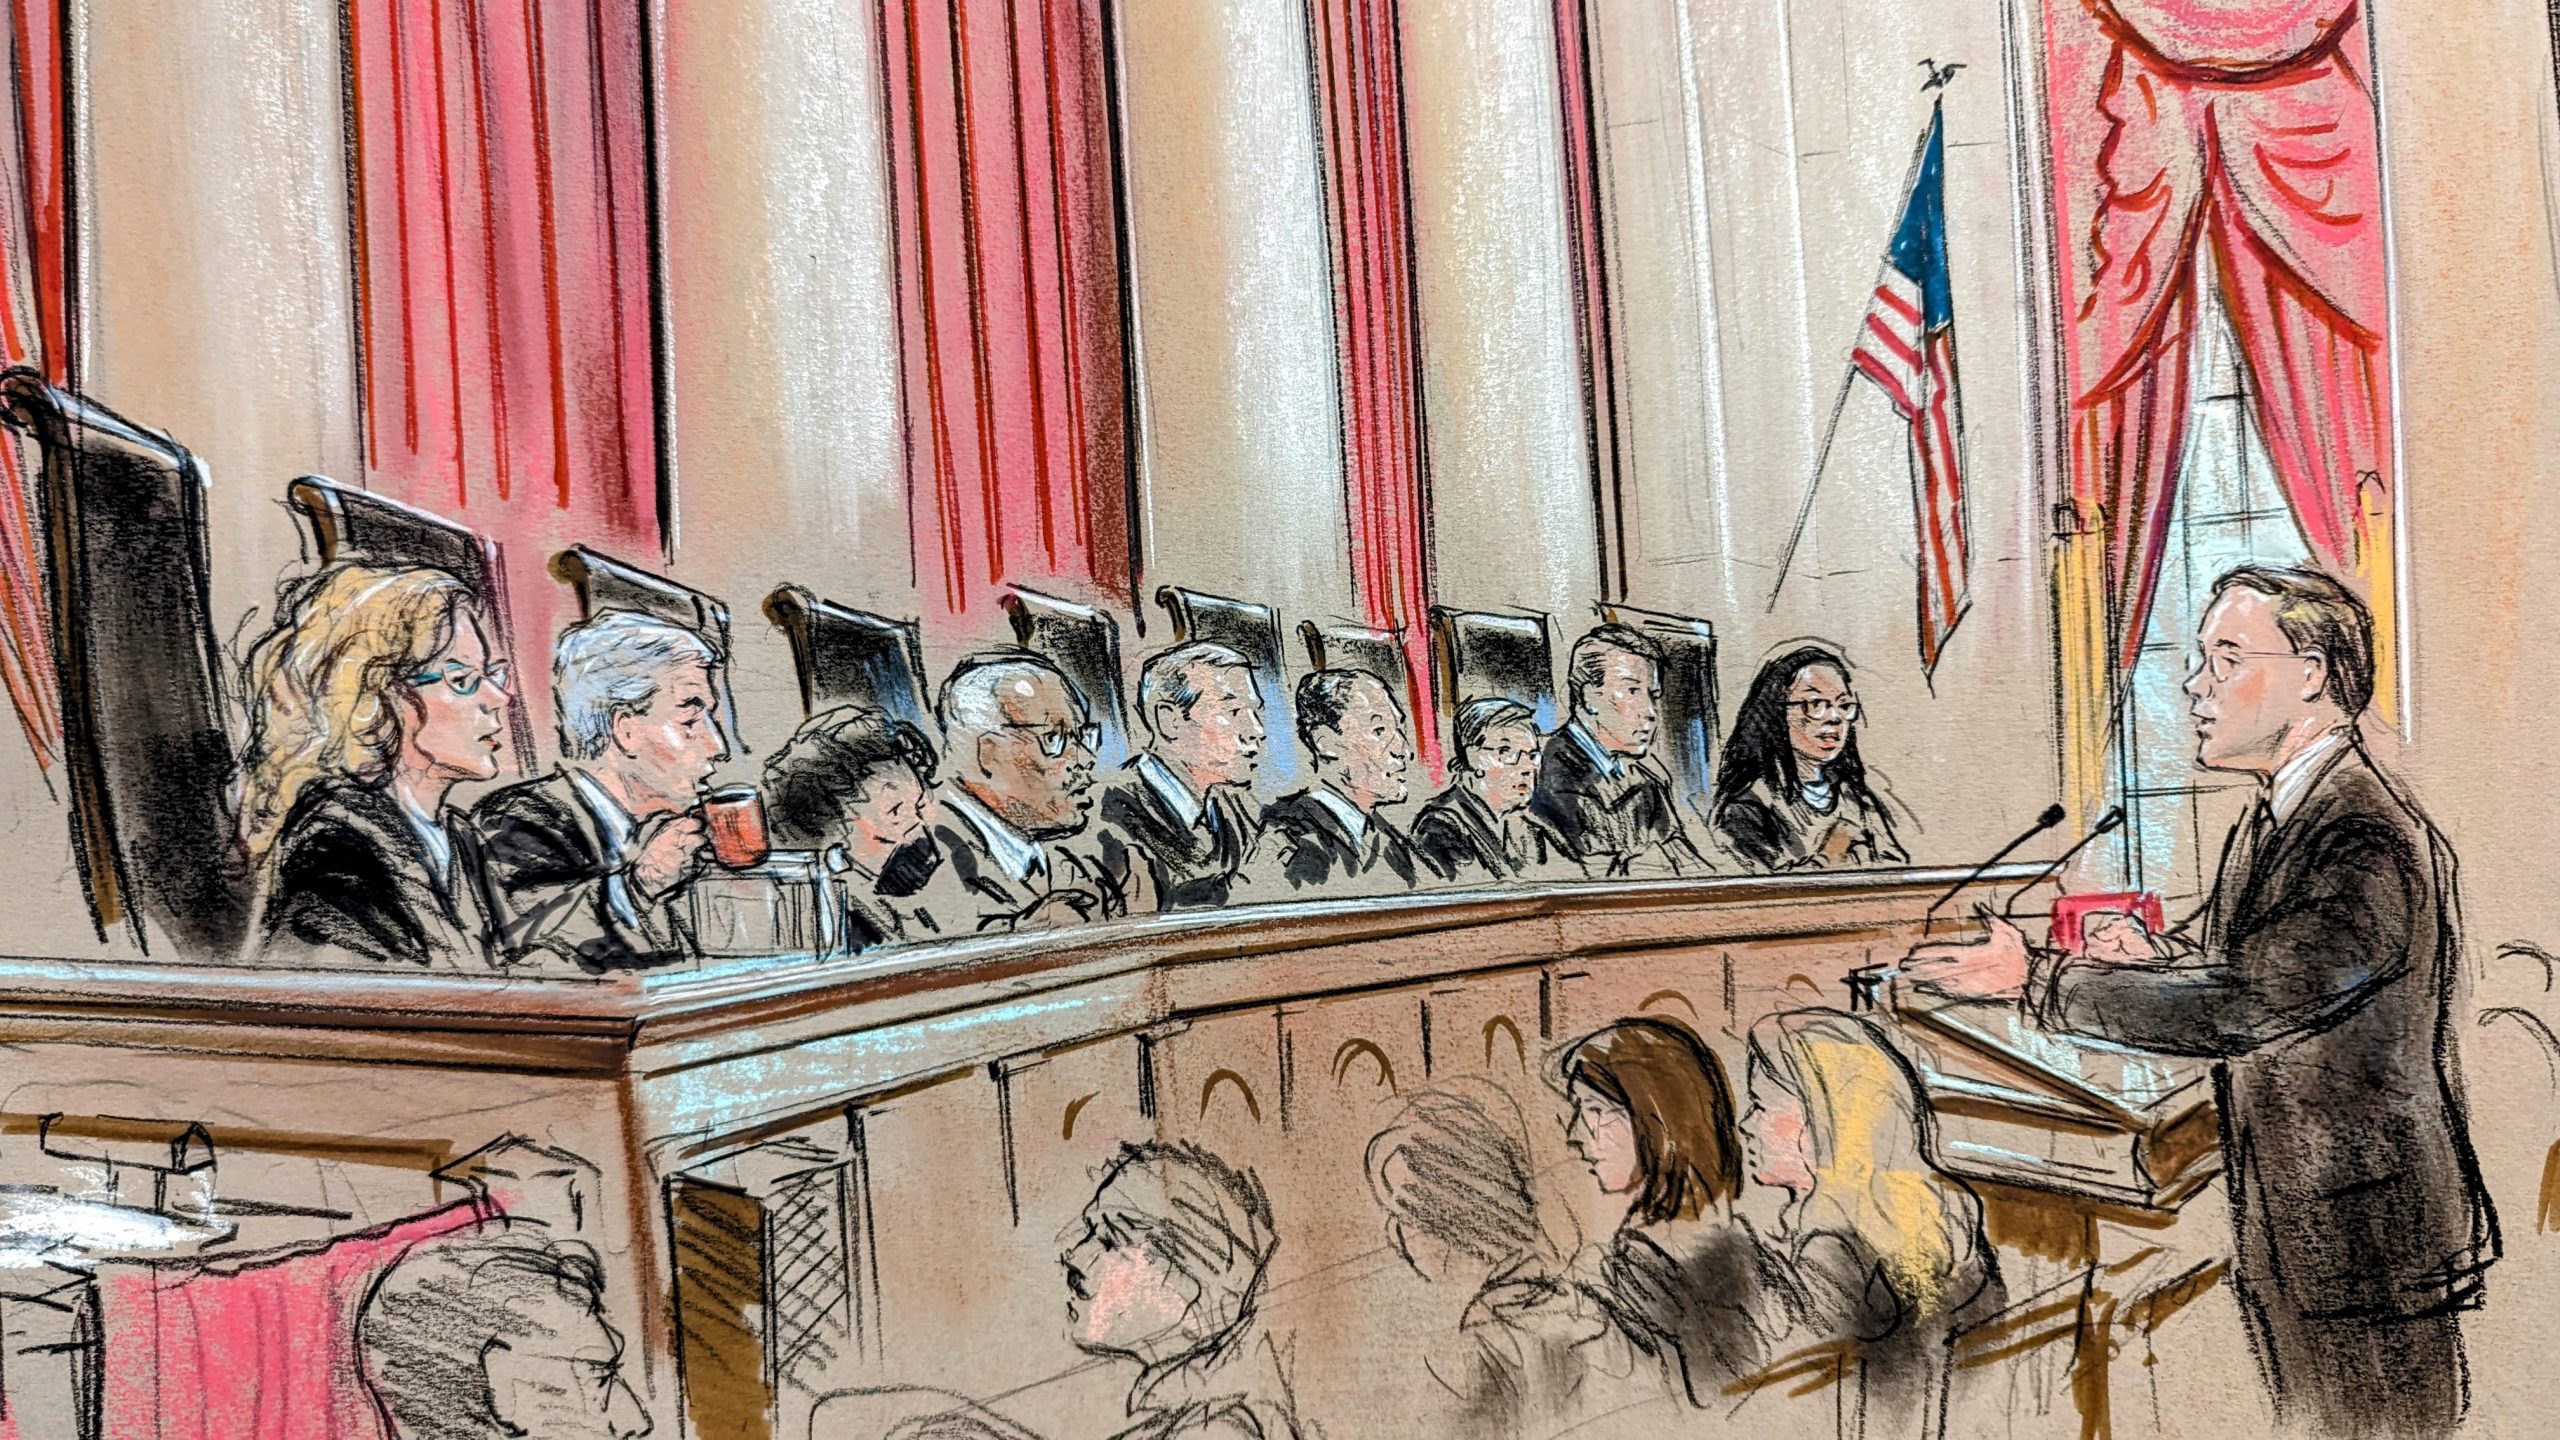 Sketch of a man in spectacles arguing before a full bench. Justice Barrett sports blue glasses, and Justice Gorsuch drinks coffee from an orange mug.